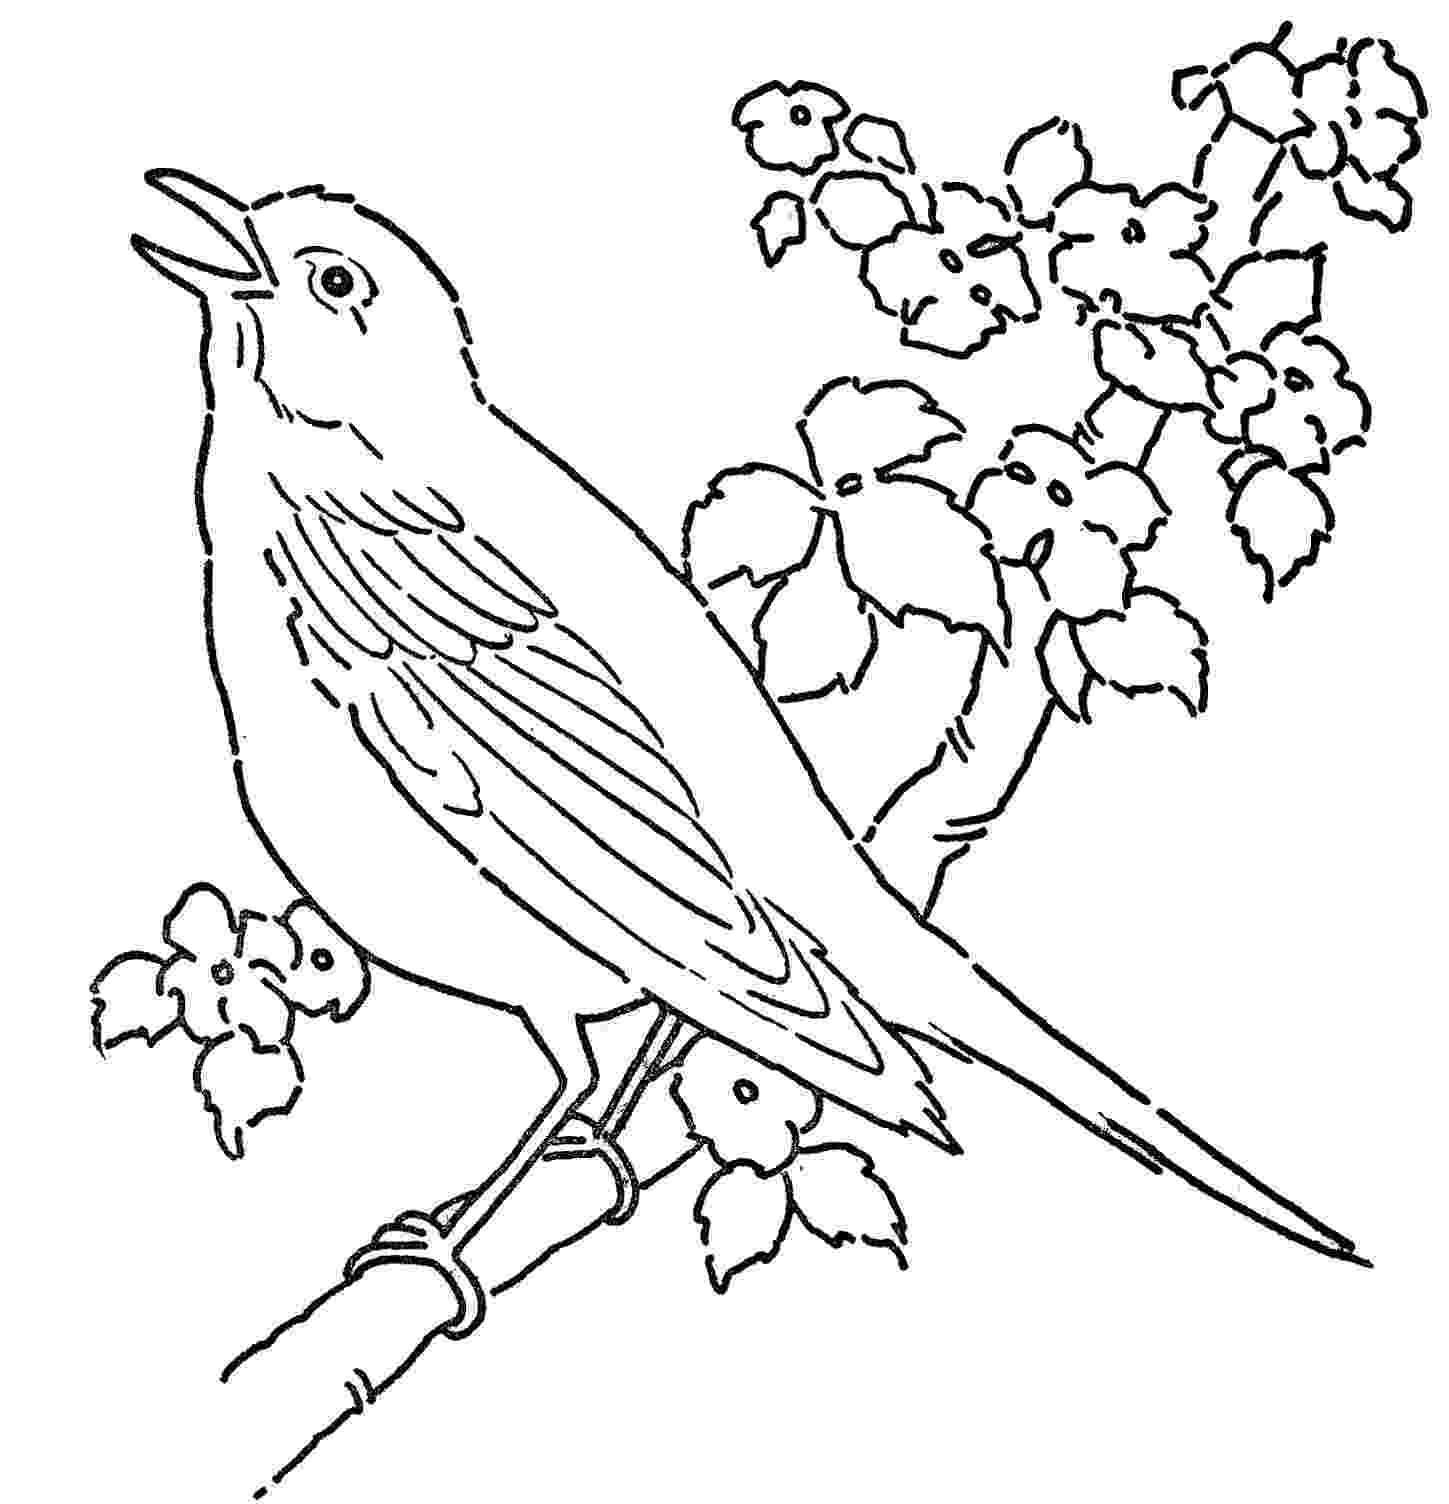 free bird coloring pages bird coloring pages to download and print for free bird coloring pages free 